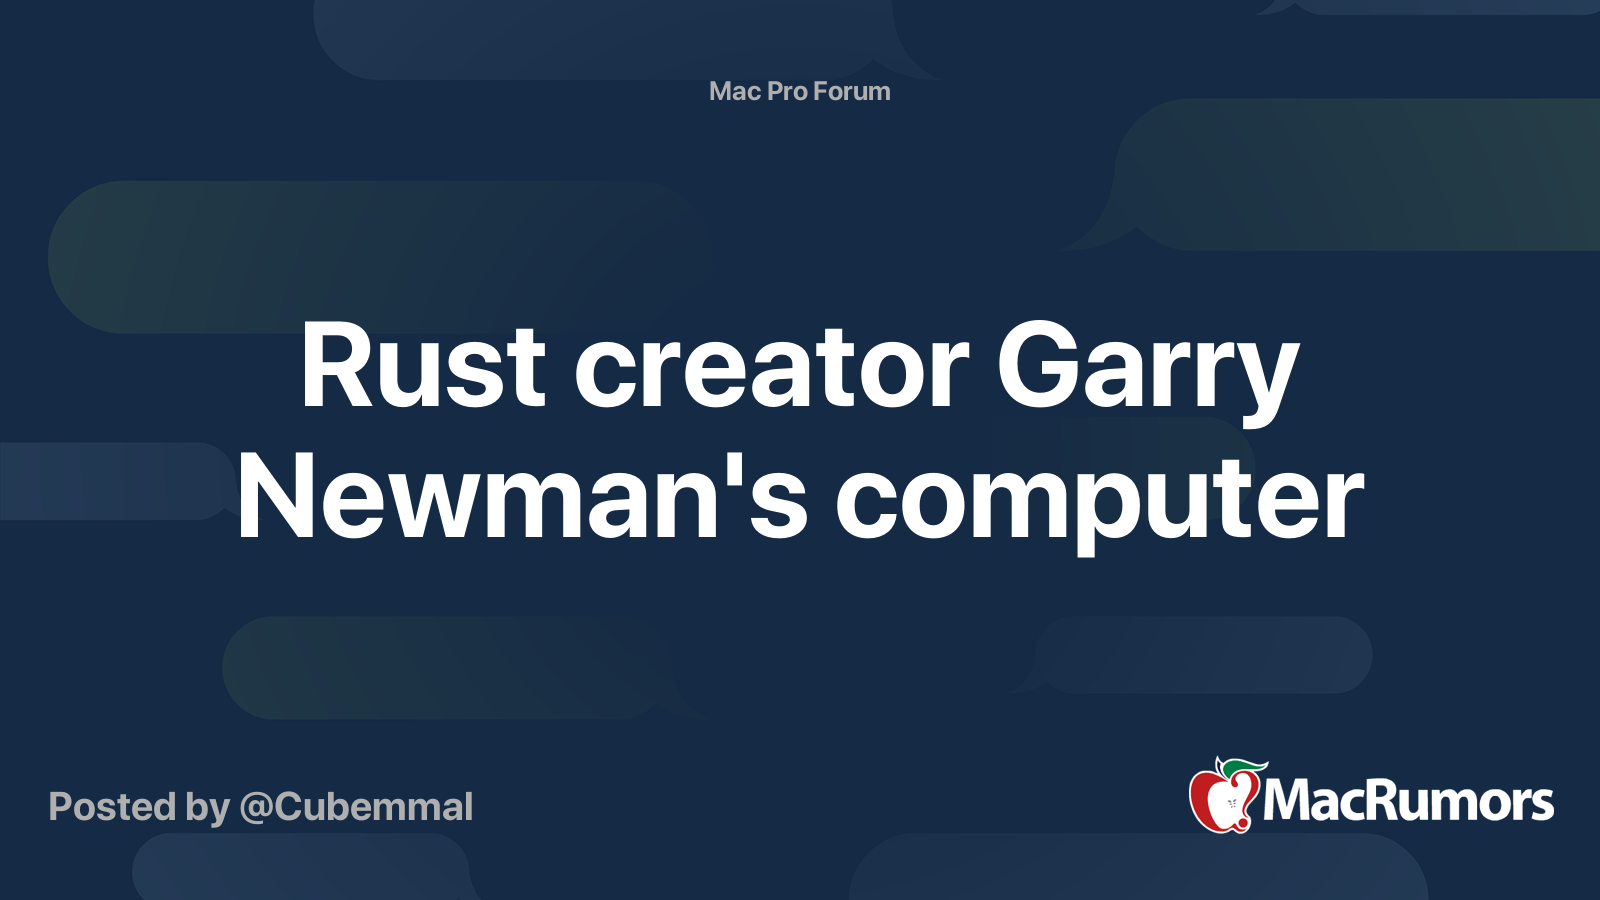 Garry Newman, the creator of Garry's Mod and Rust.